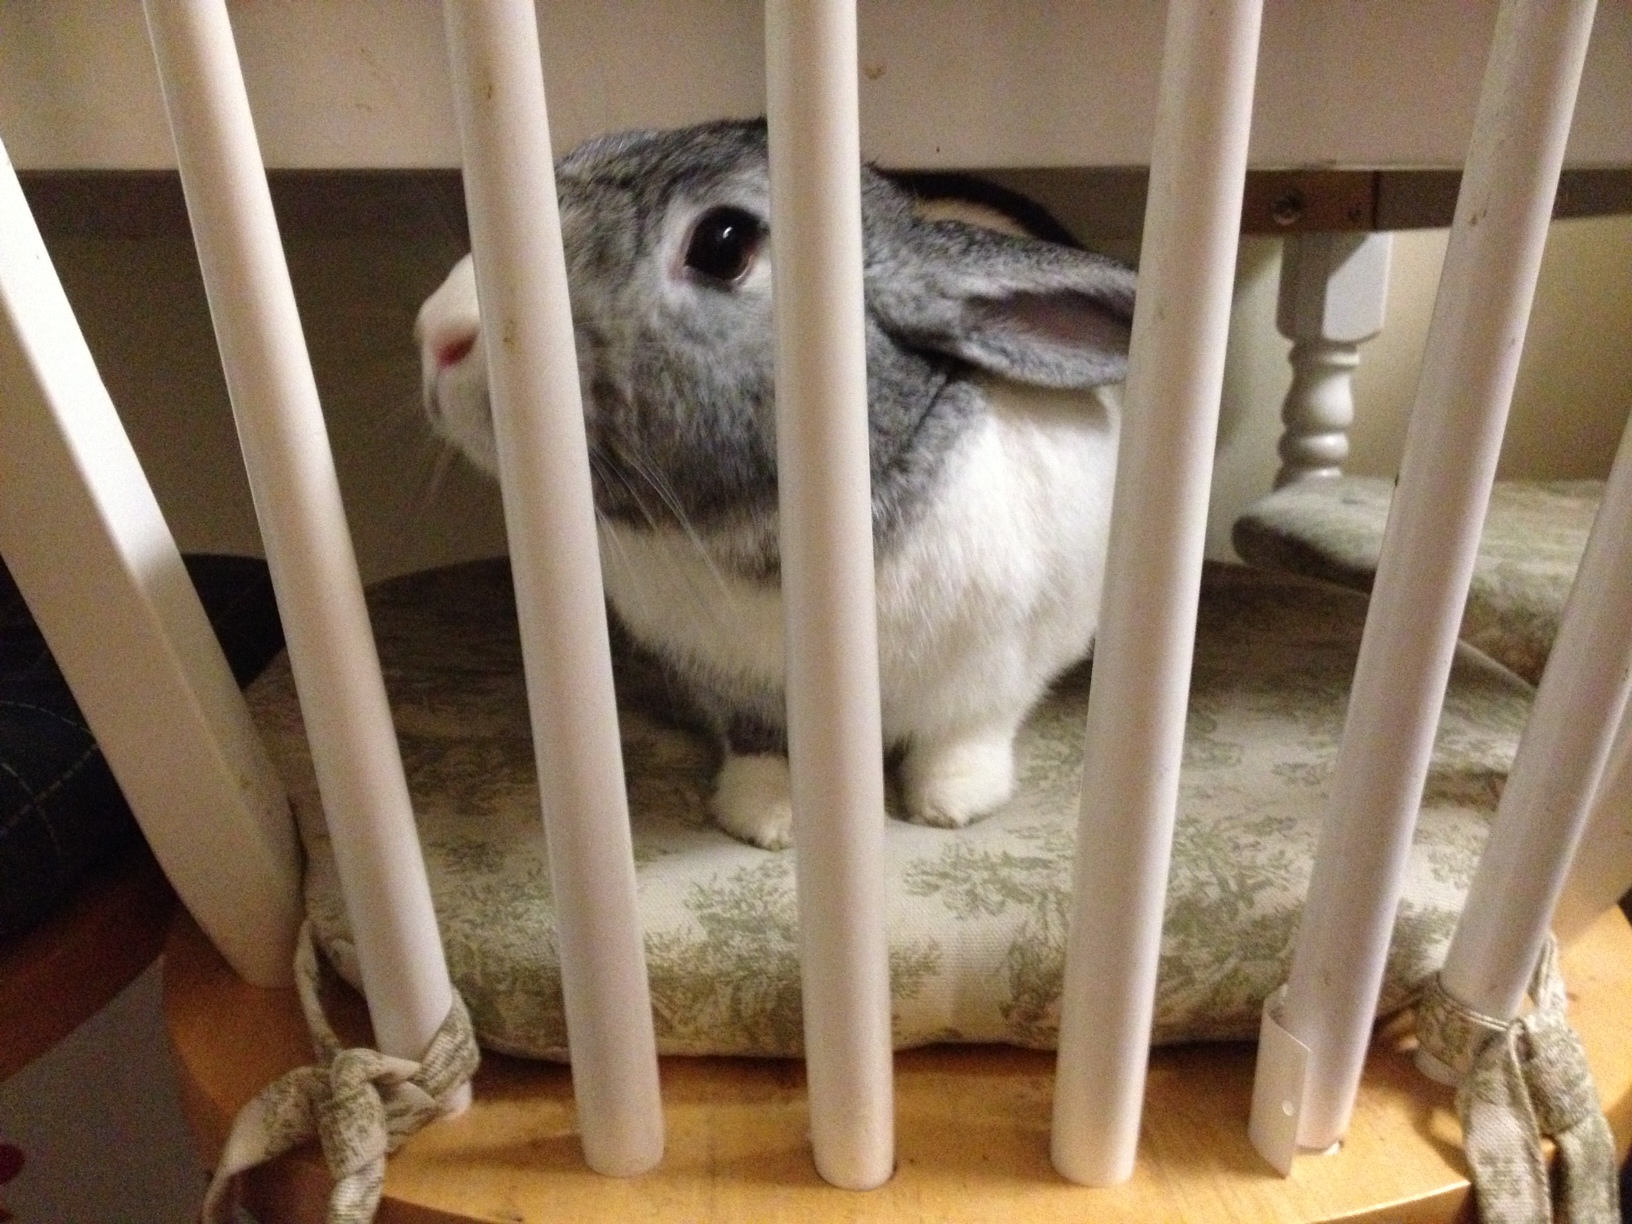 Jailed Bunny Is Sentenced to a Lifetime of Cuddles and Treats